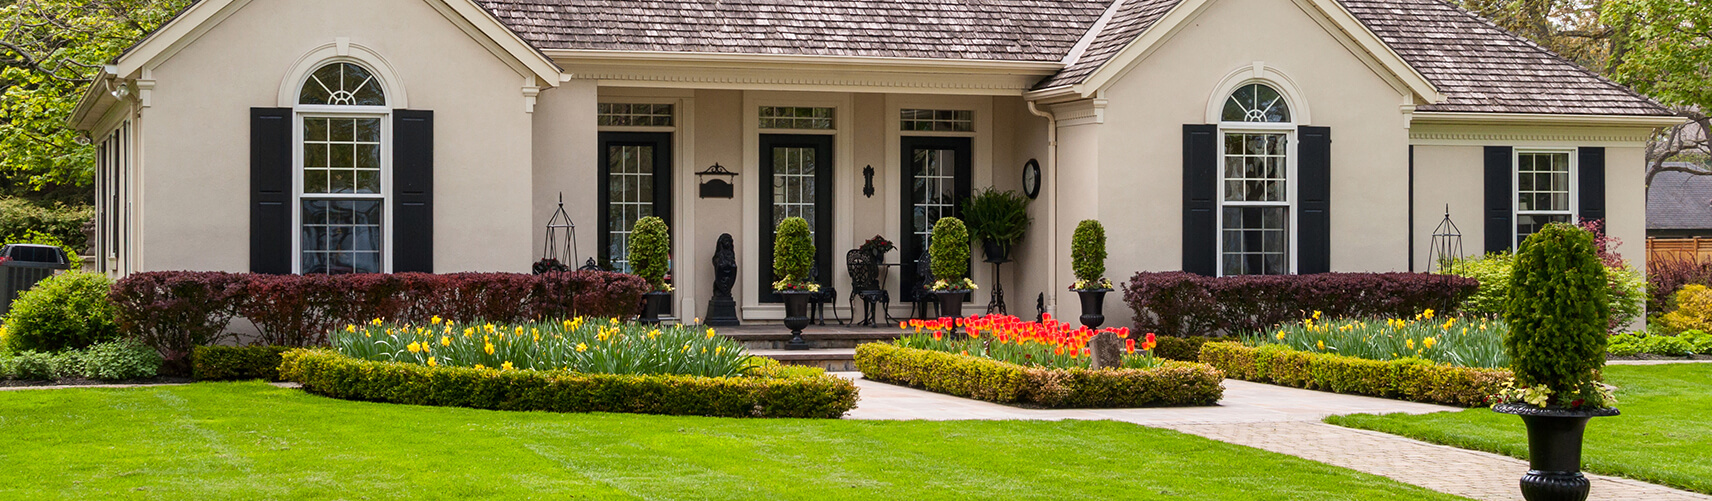 High Point Lawn Maintenance, Lawn Care Services and Lawn Mowing Service